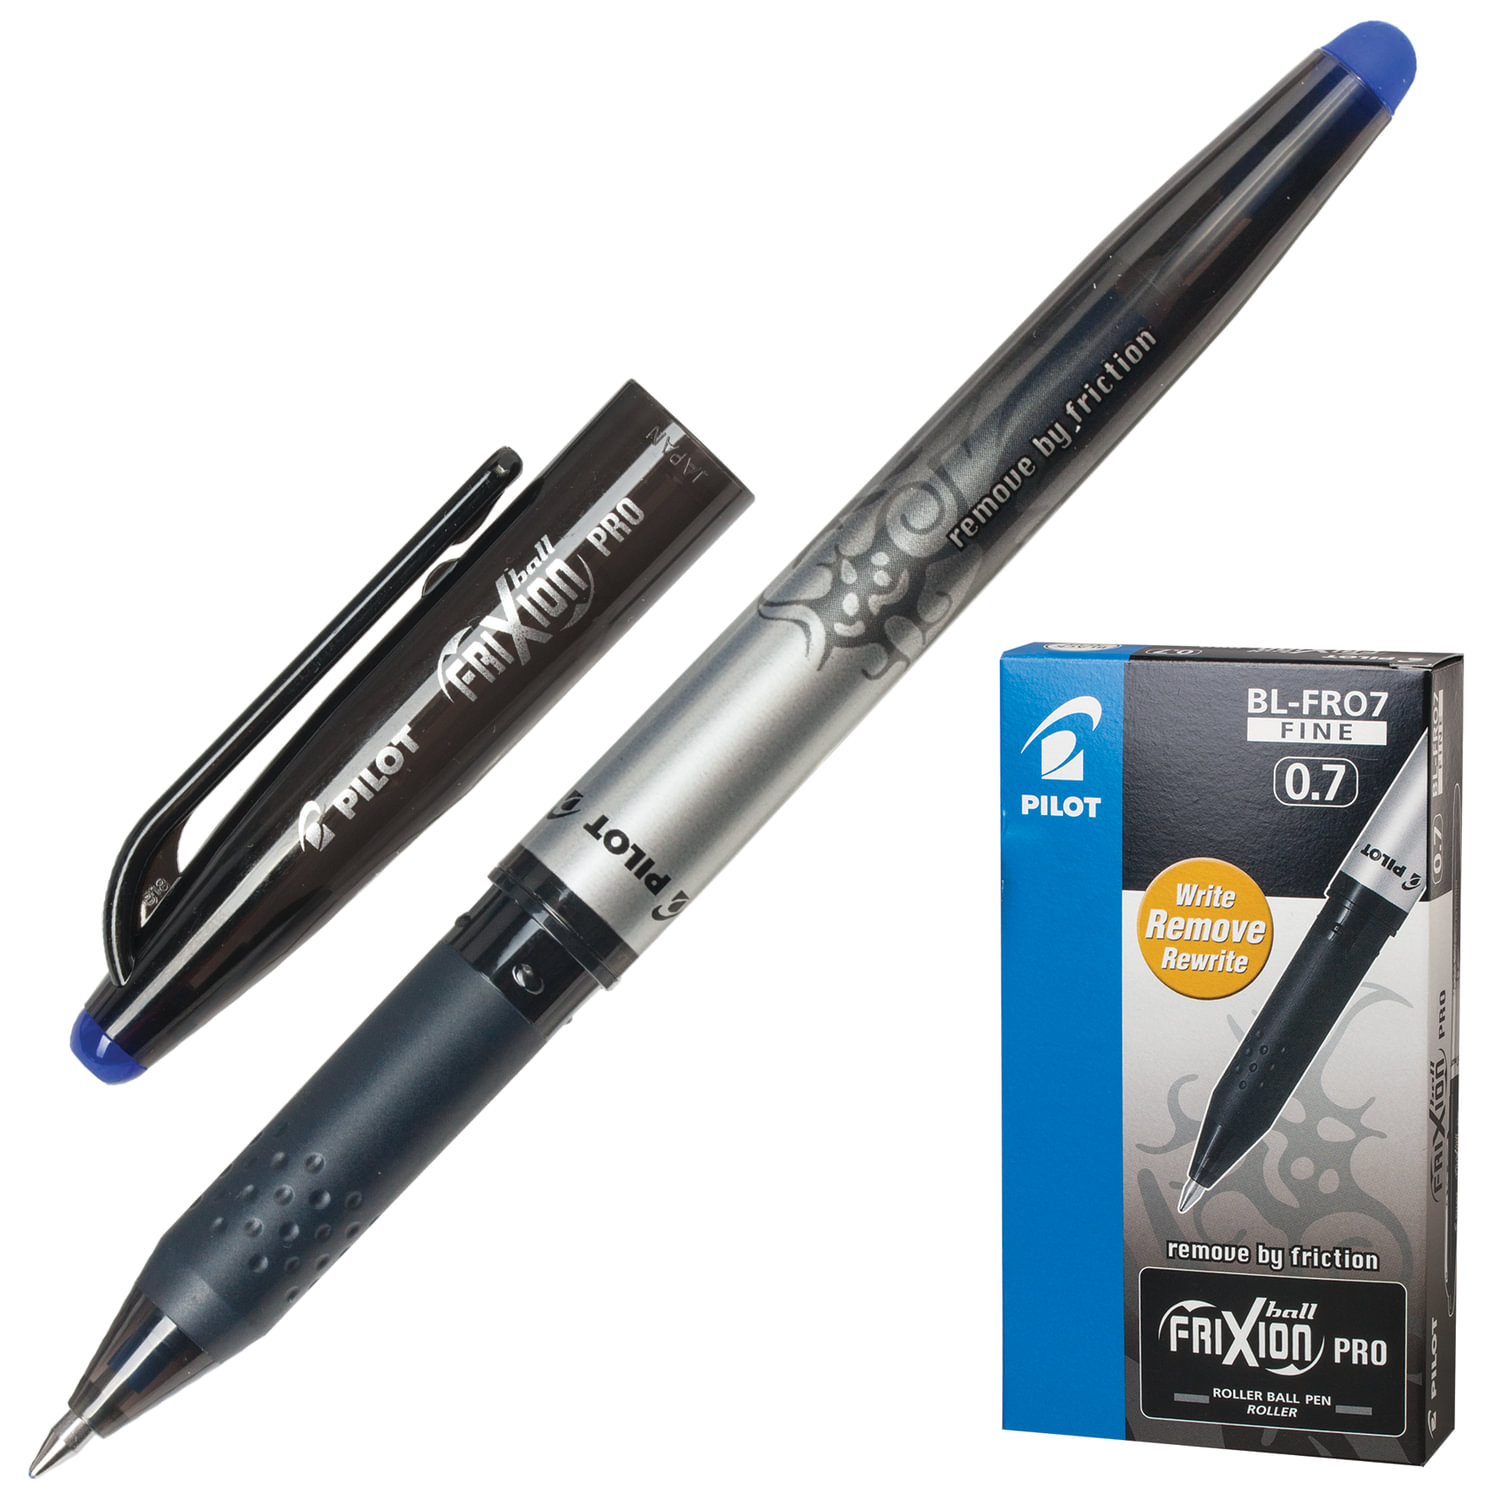  PILOT BL-FRO-7,  12 .